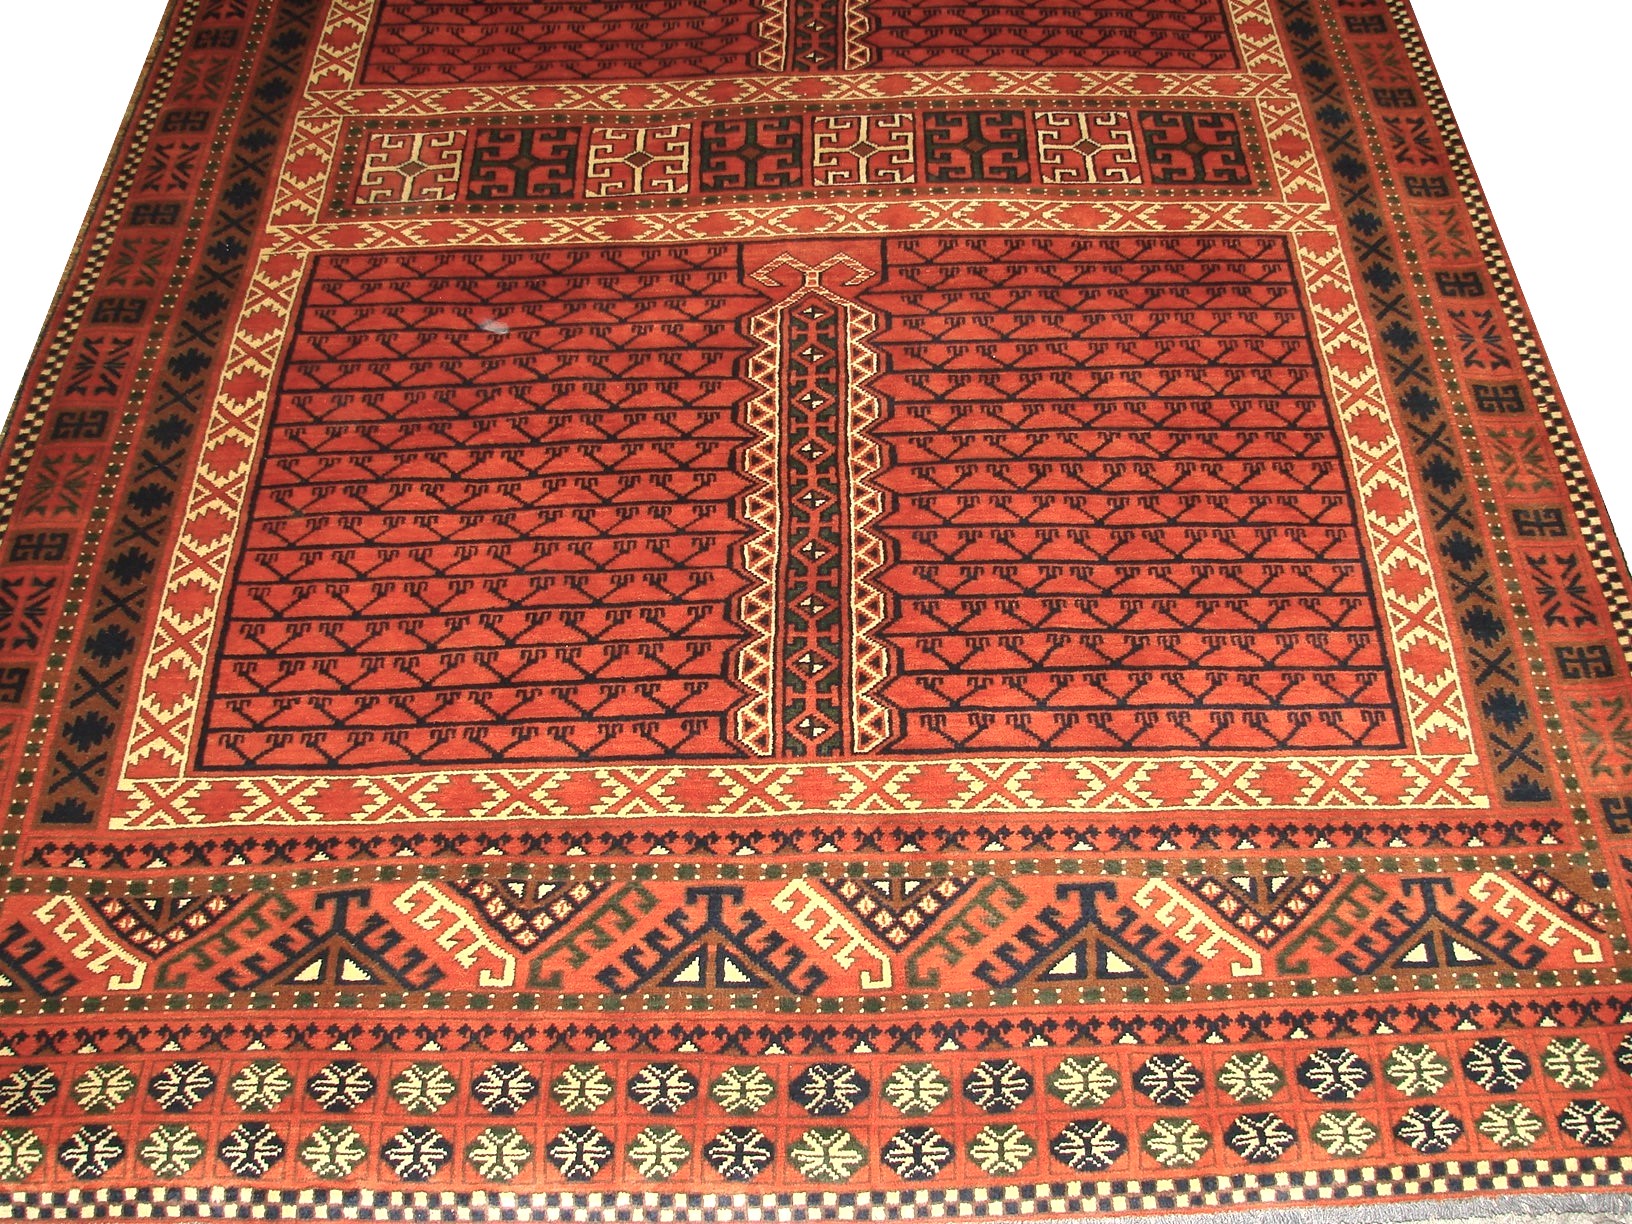 6x9 Kazak Hand Knotted Wool Area Rug - MR12787